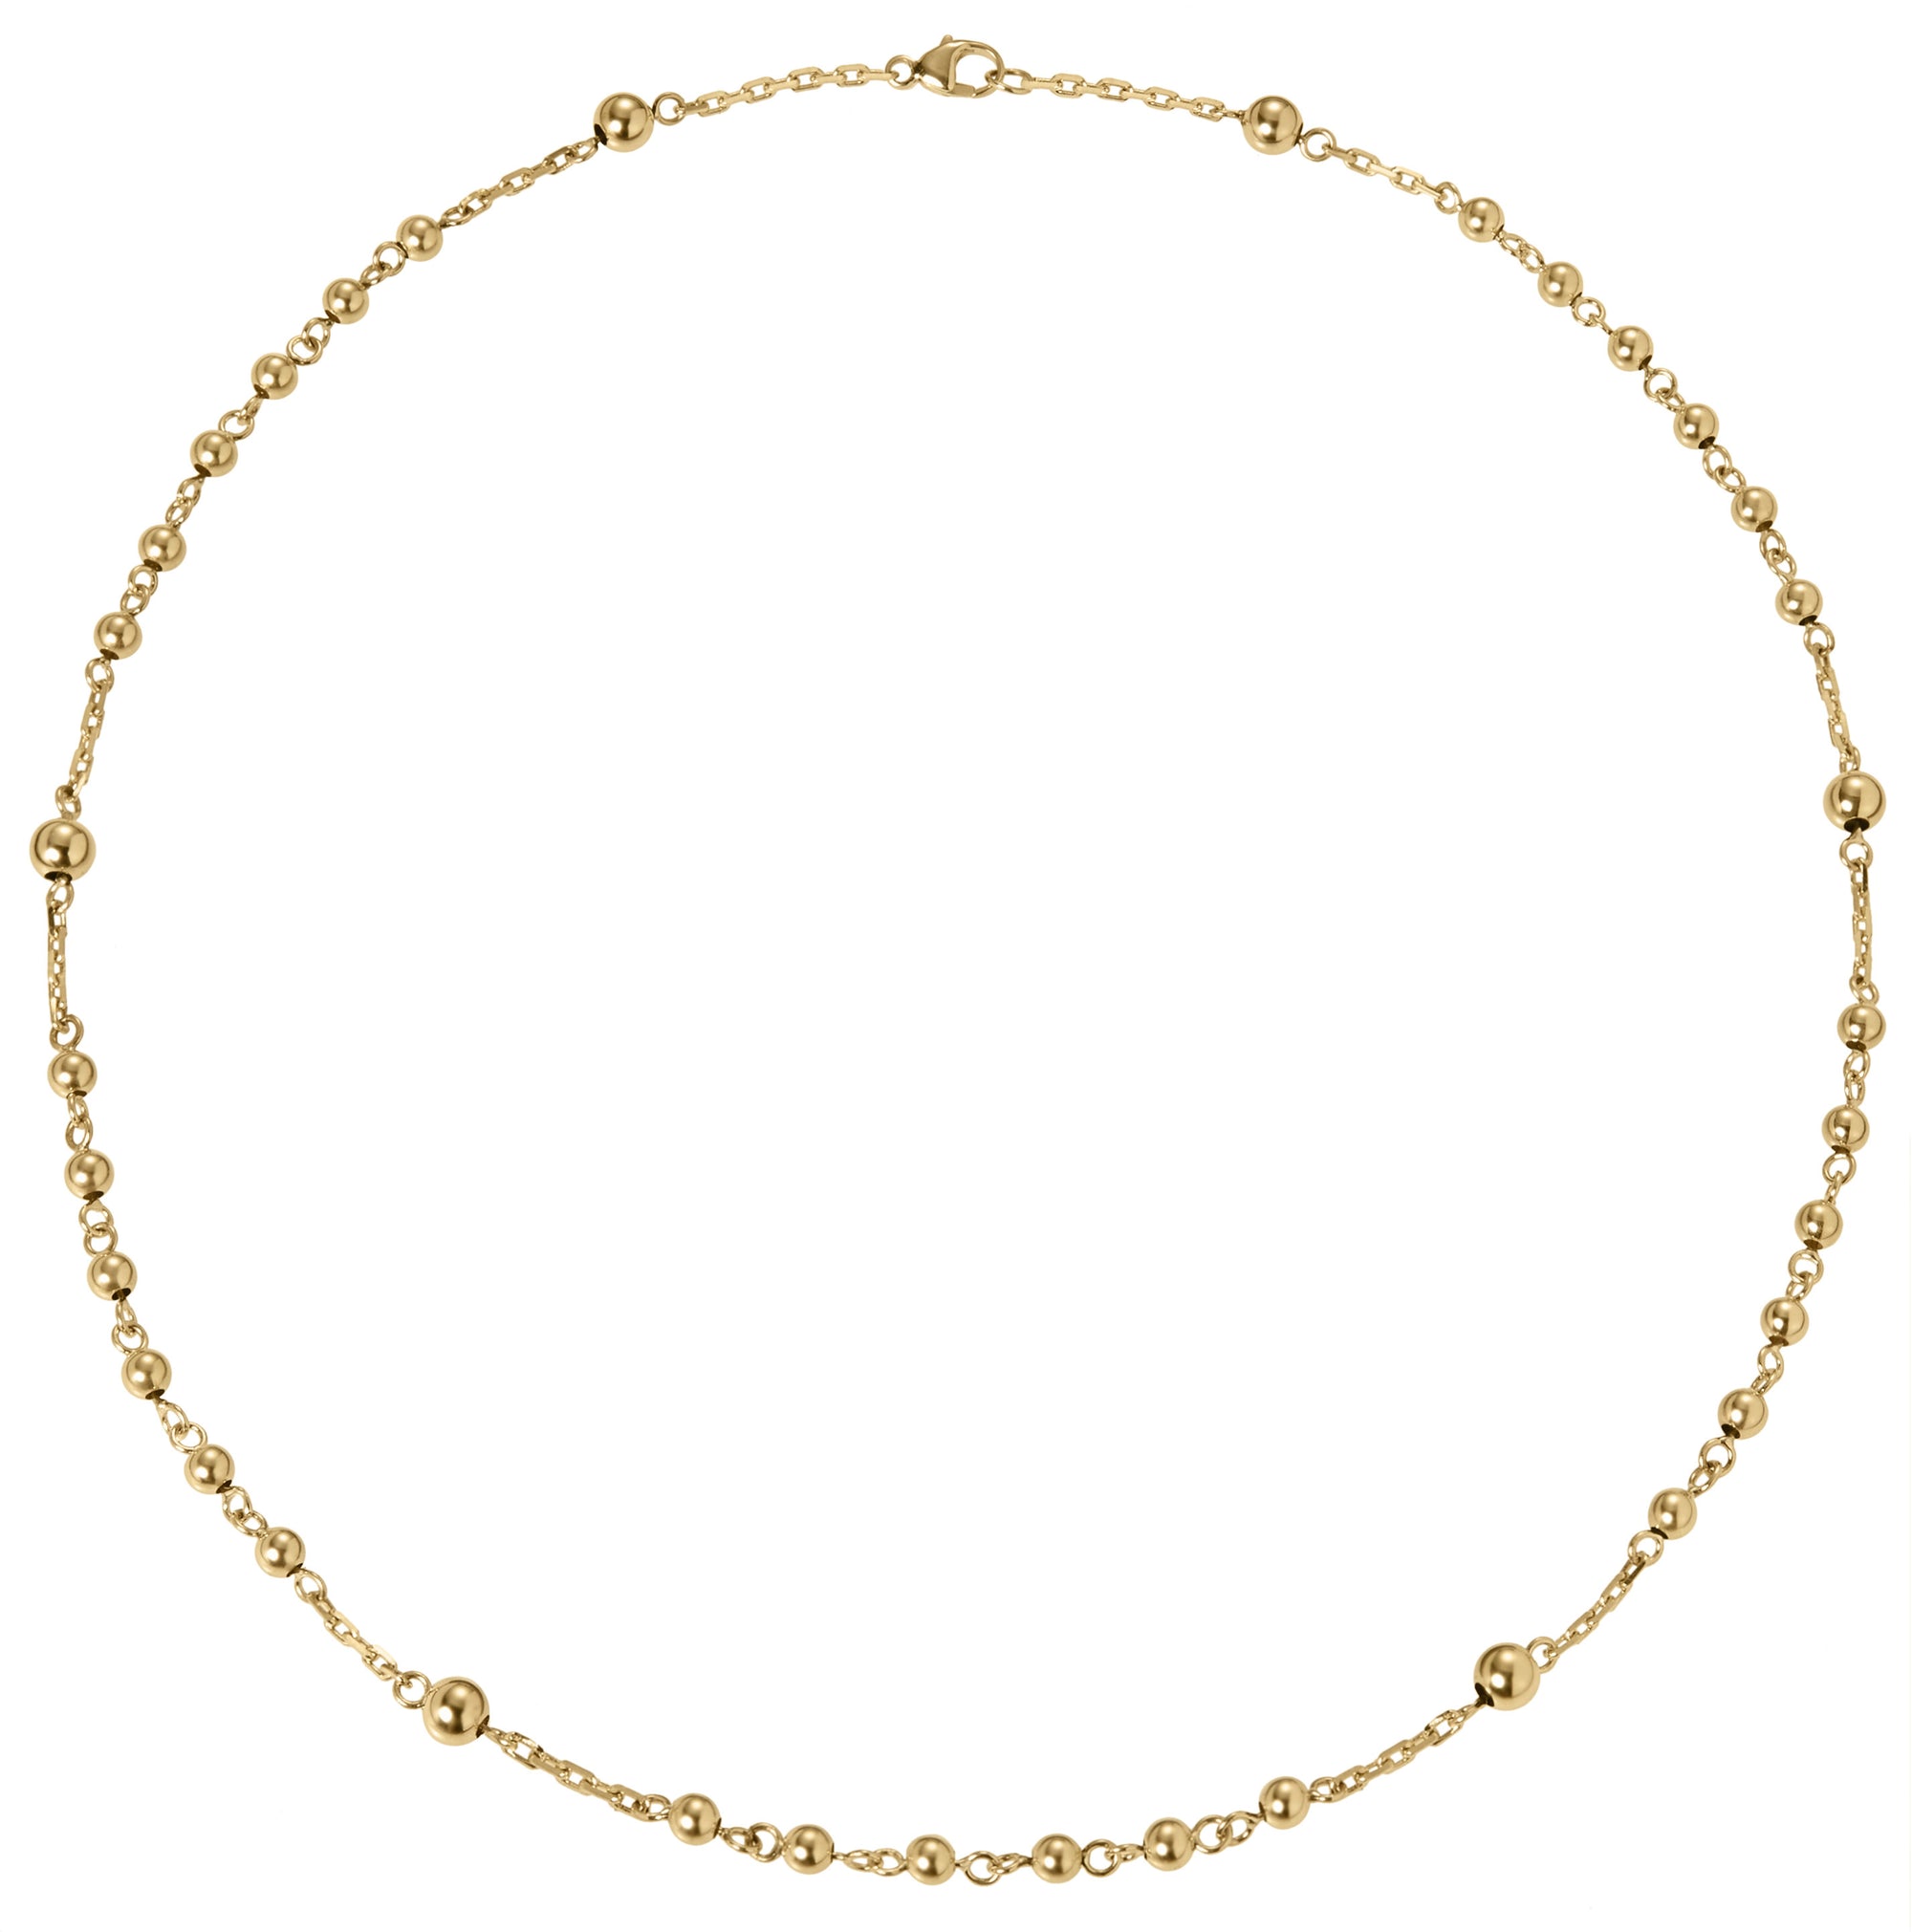 everyday modern rosary bead short chain necklace in 18k gold by finn by candice pool neistat